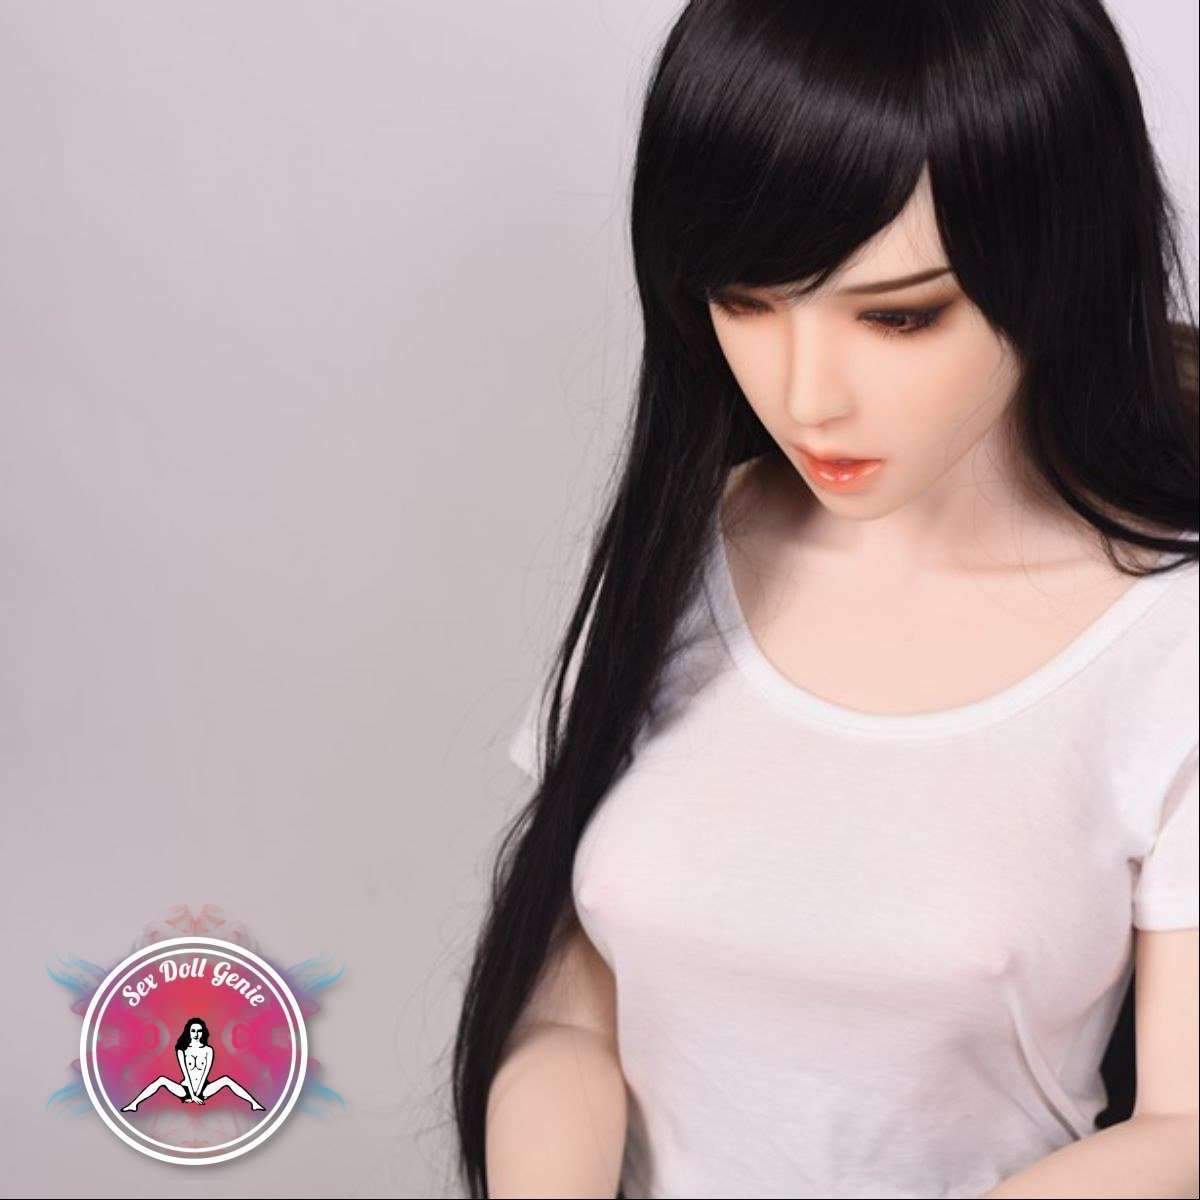 DS Doll - 163Plus - Kayla Head - Type 2 D Cup Silicone Doll-3